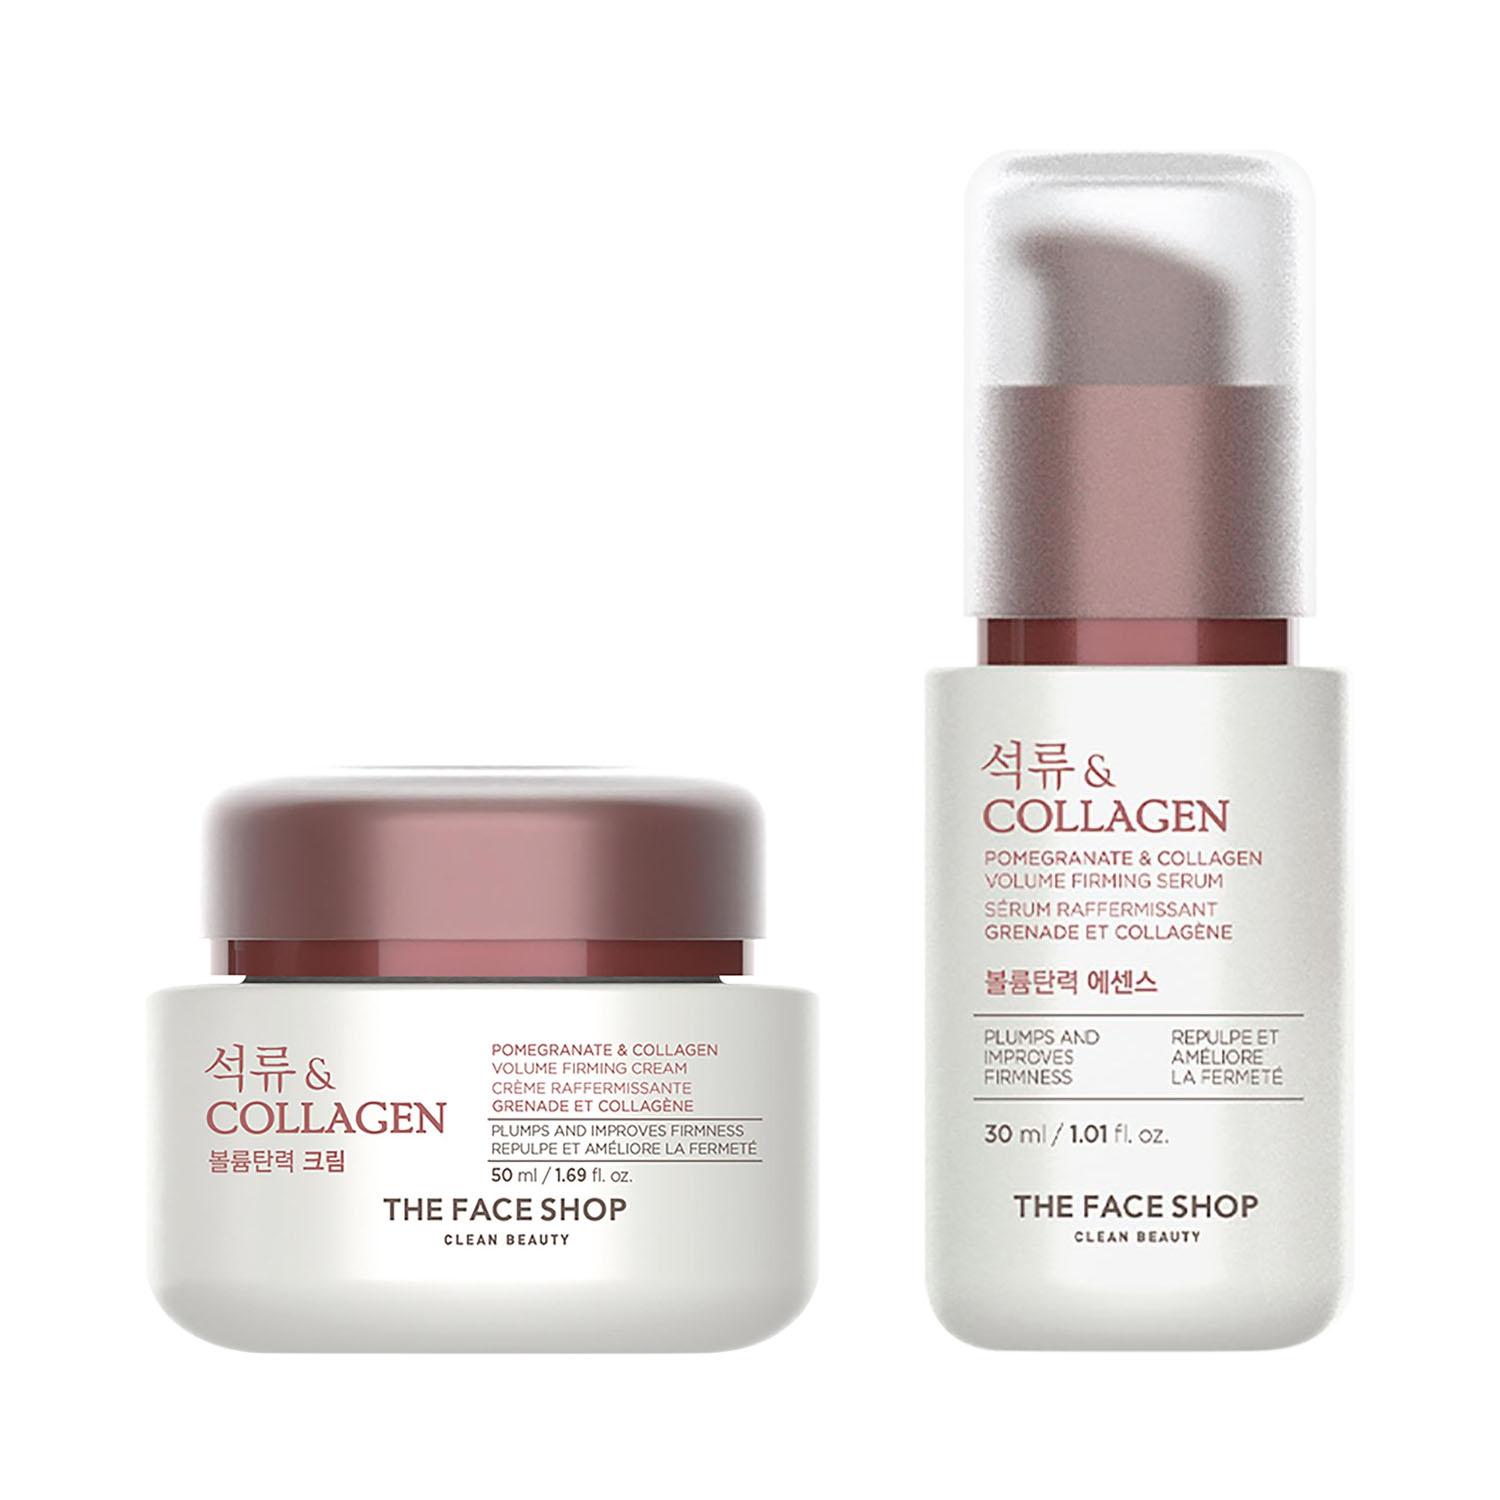 The Face Shop | The Face Shop Pomegranate Glow Duo Combo